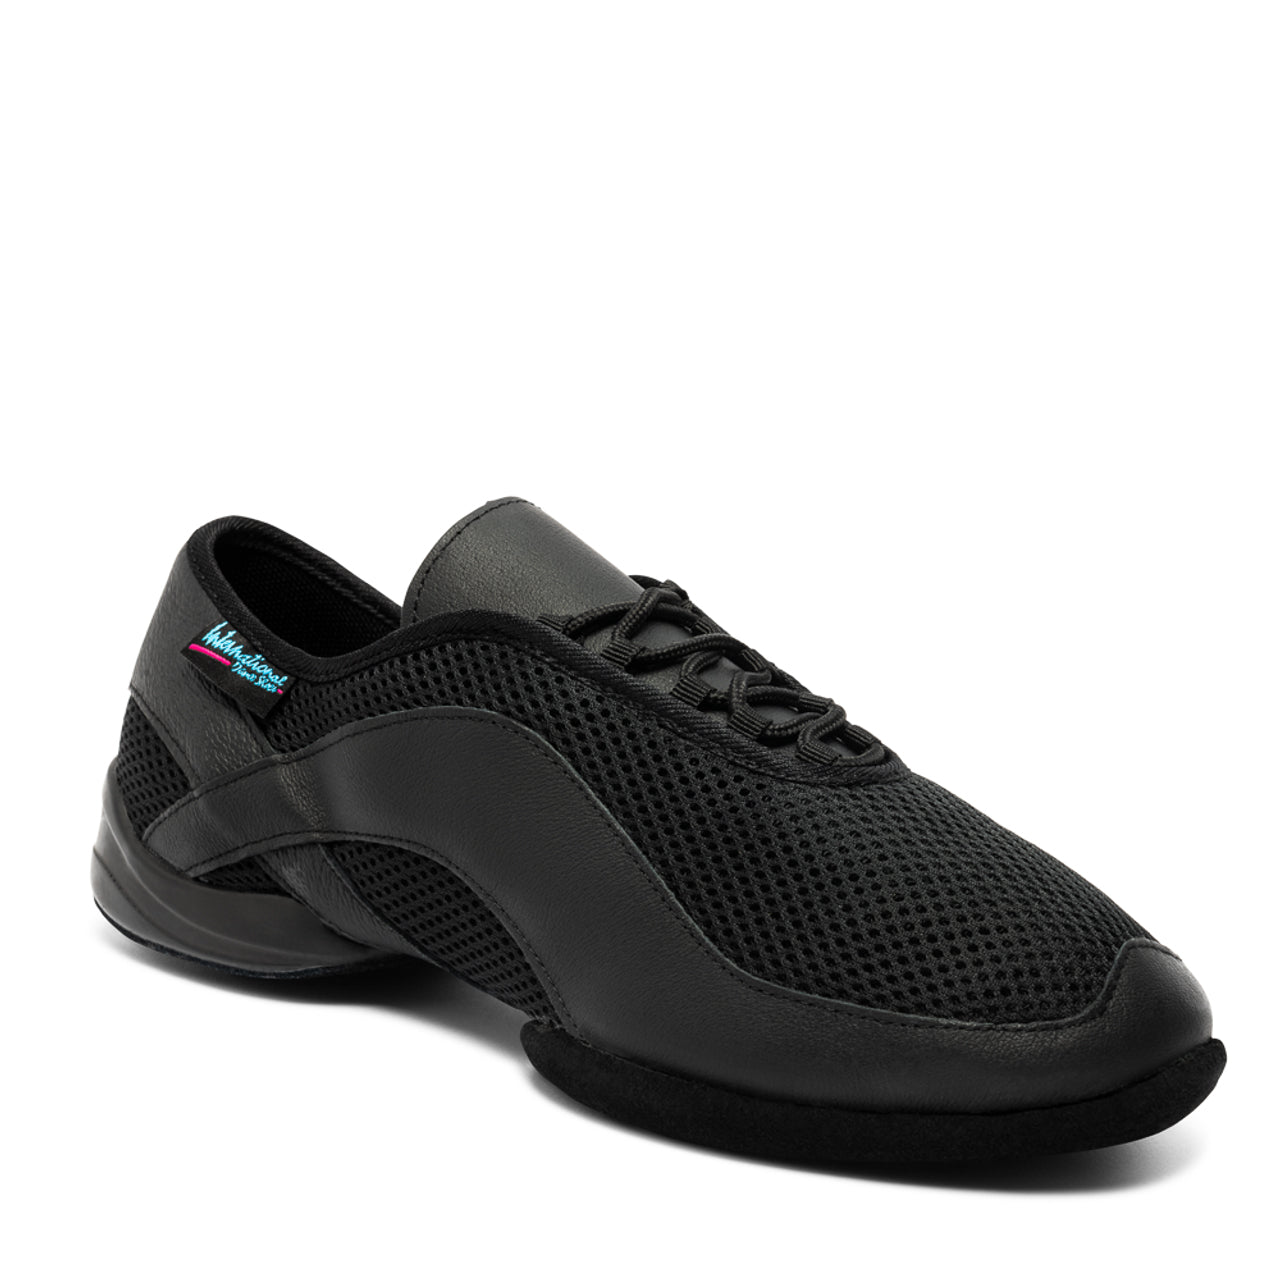 International Dance Shoes IDS Practice or Teaching Ballroom Shoe in AirMesh/Black Patent  or Black Leather TEMPO in Stock